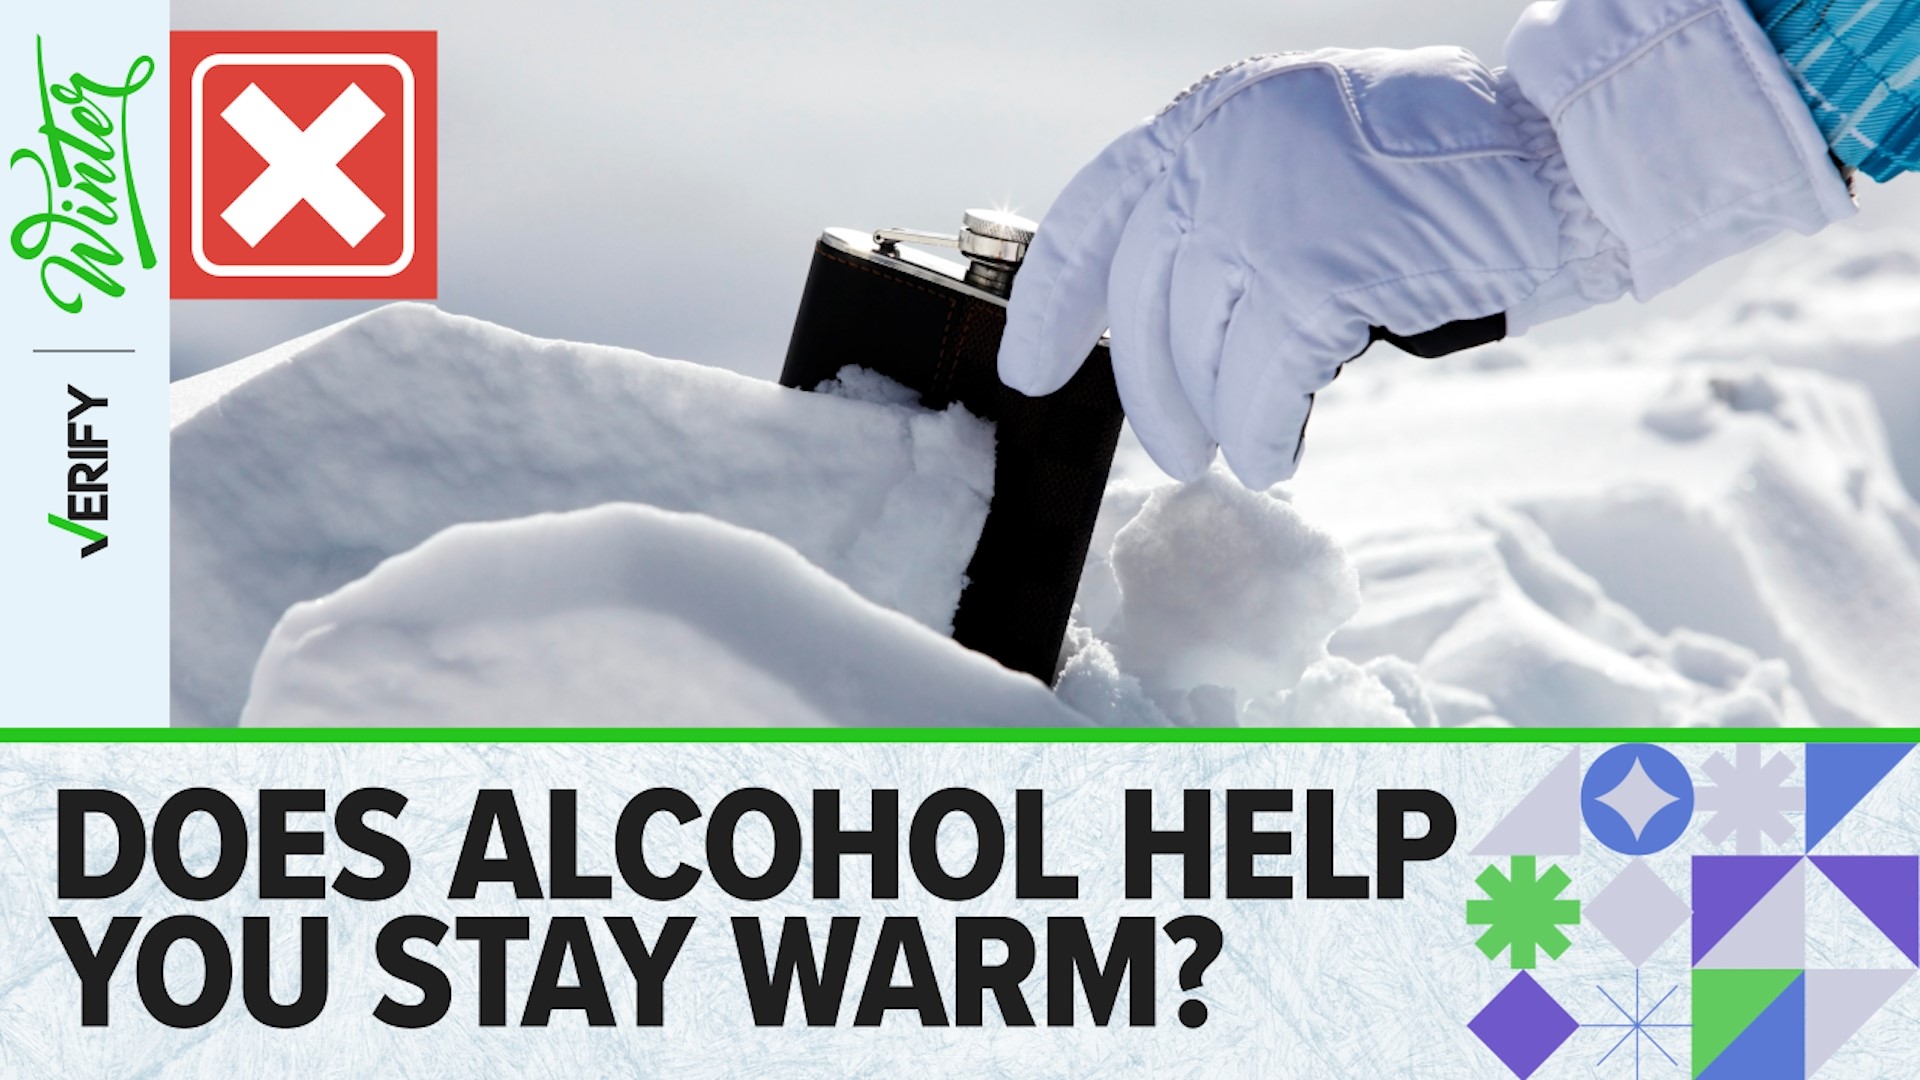 Drinking an alcoholic beverage does not help keep you warm when it’s cold outside. It actually cools you down instead. This widely held belief is a myth.